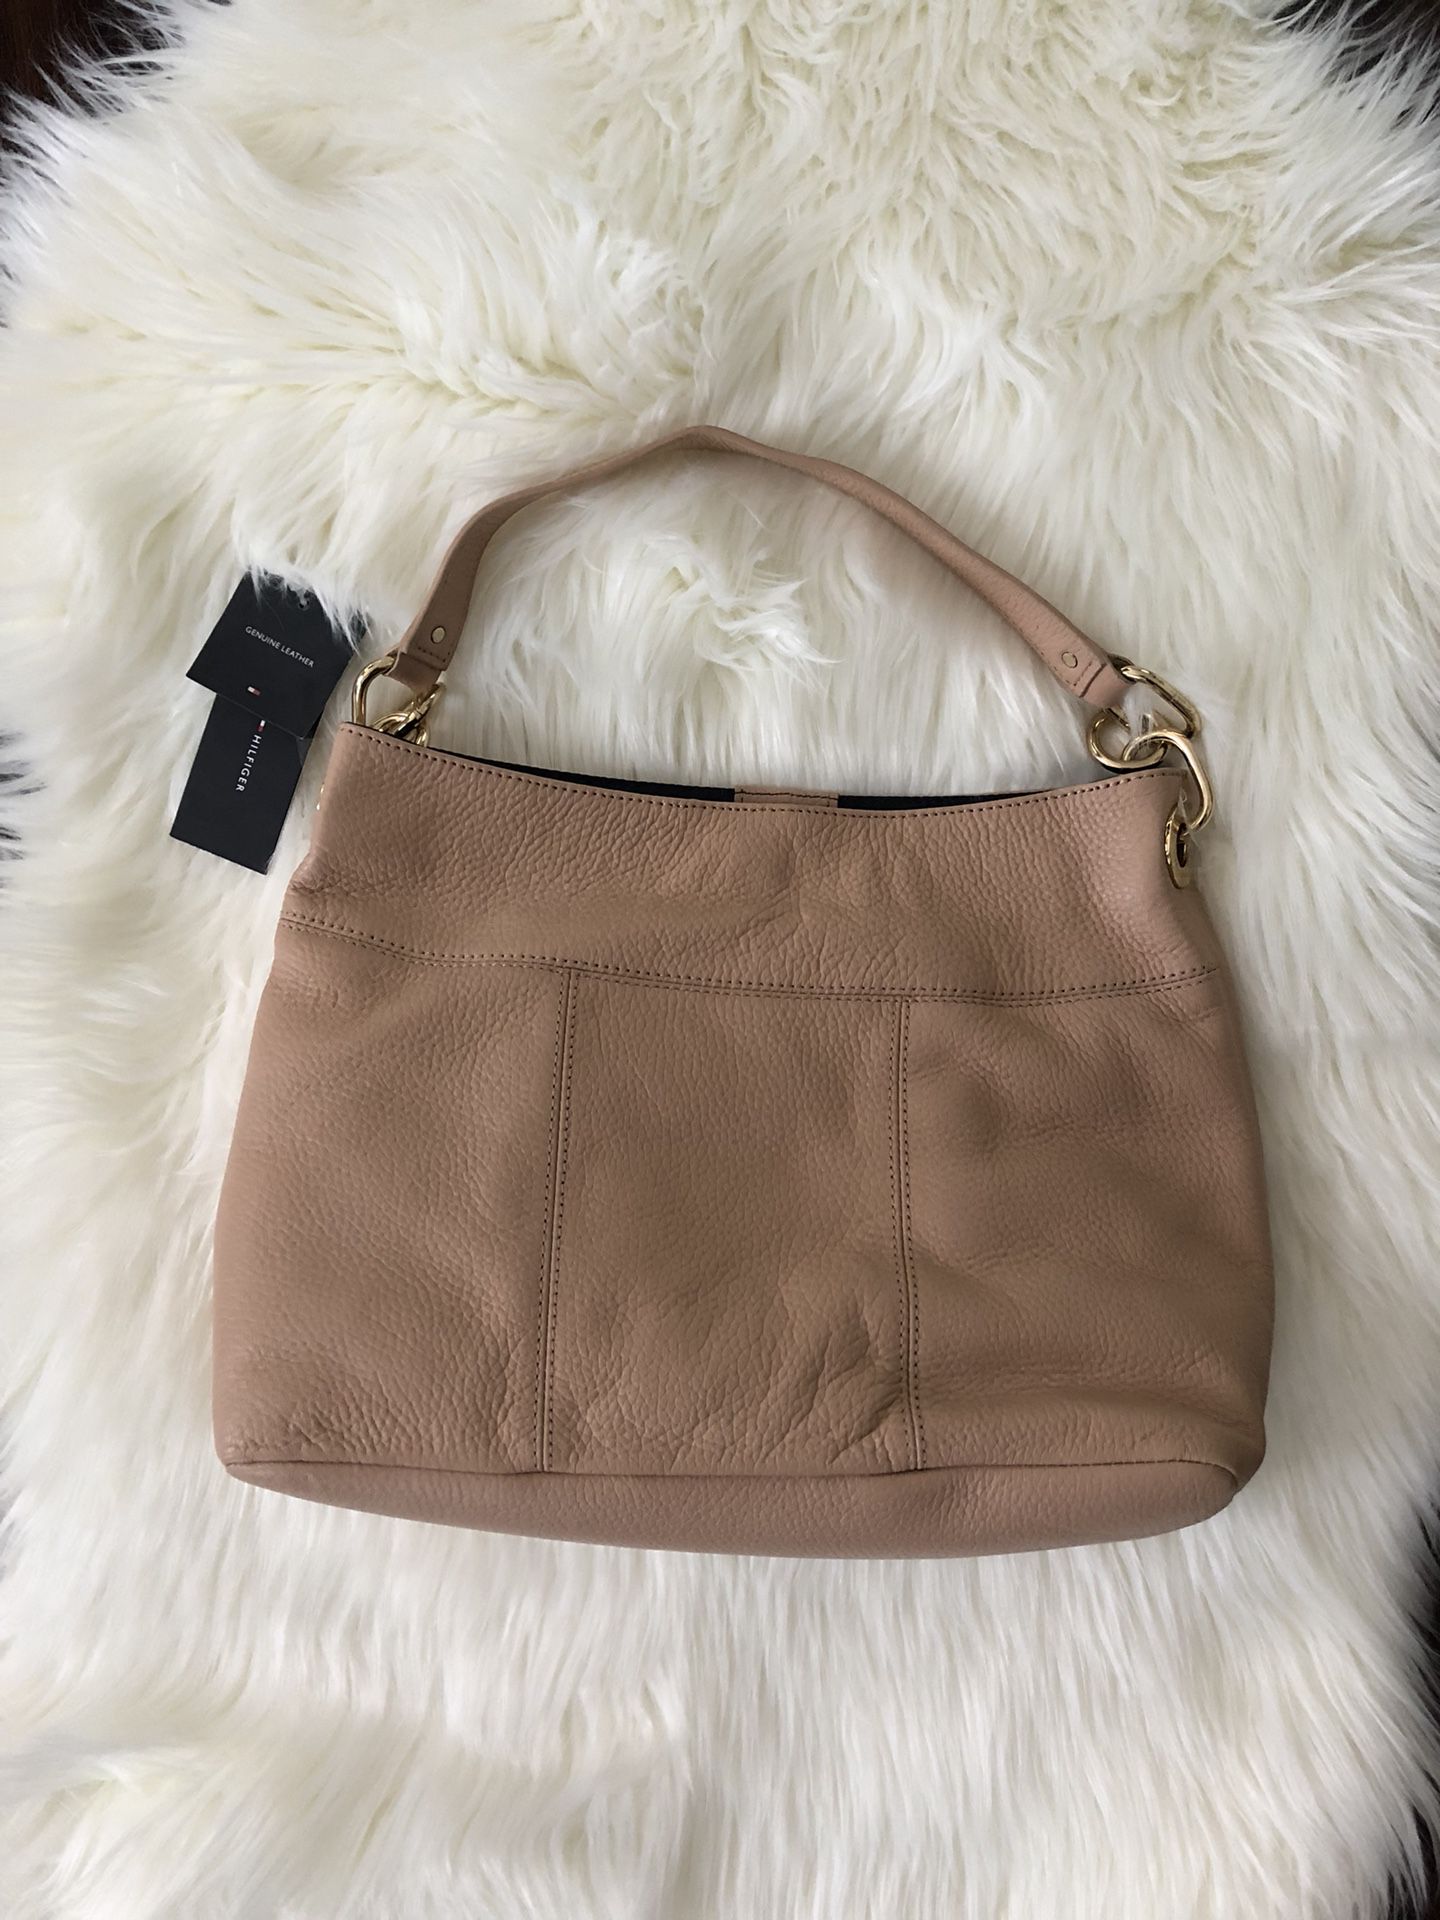 New Tommy Hilfiger nude leather hobo bag purse